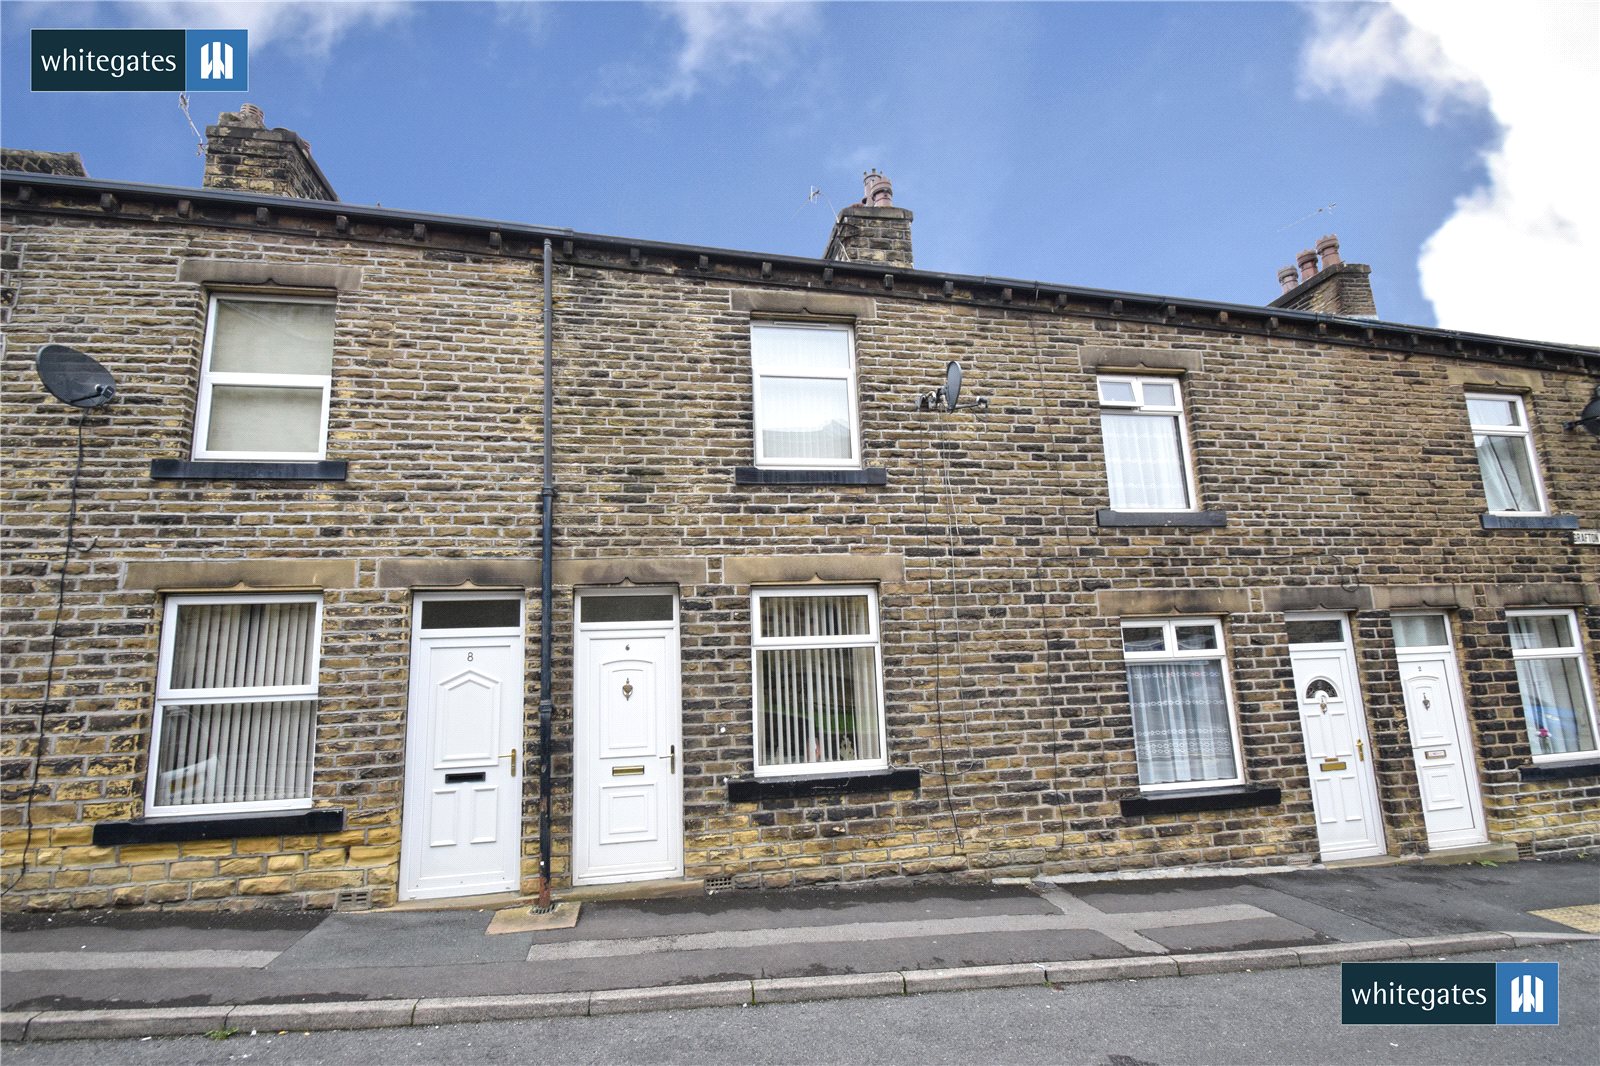 Martin Co Keighley 2 Bedroom House For Sale In Grafton Road Keighley Bradford